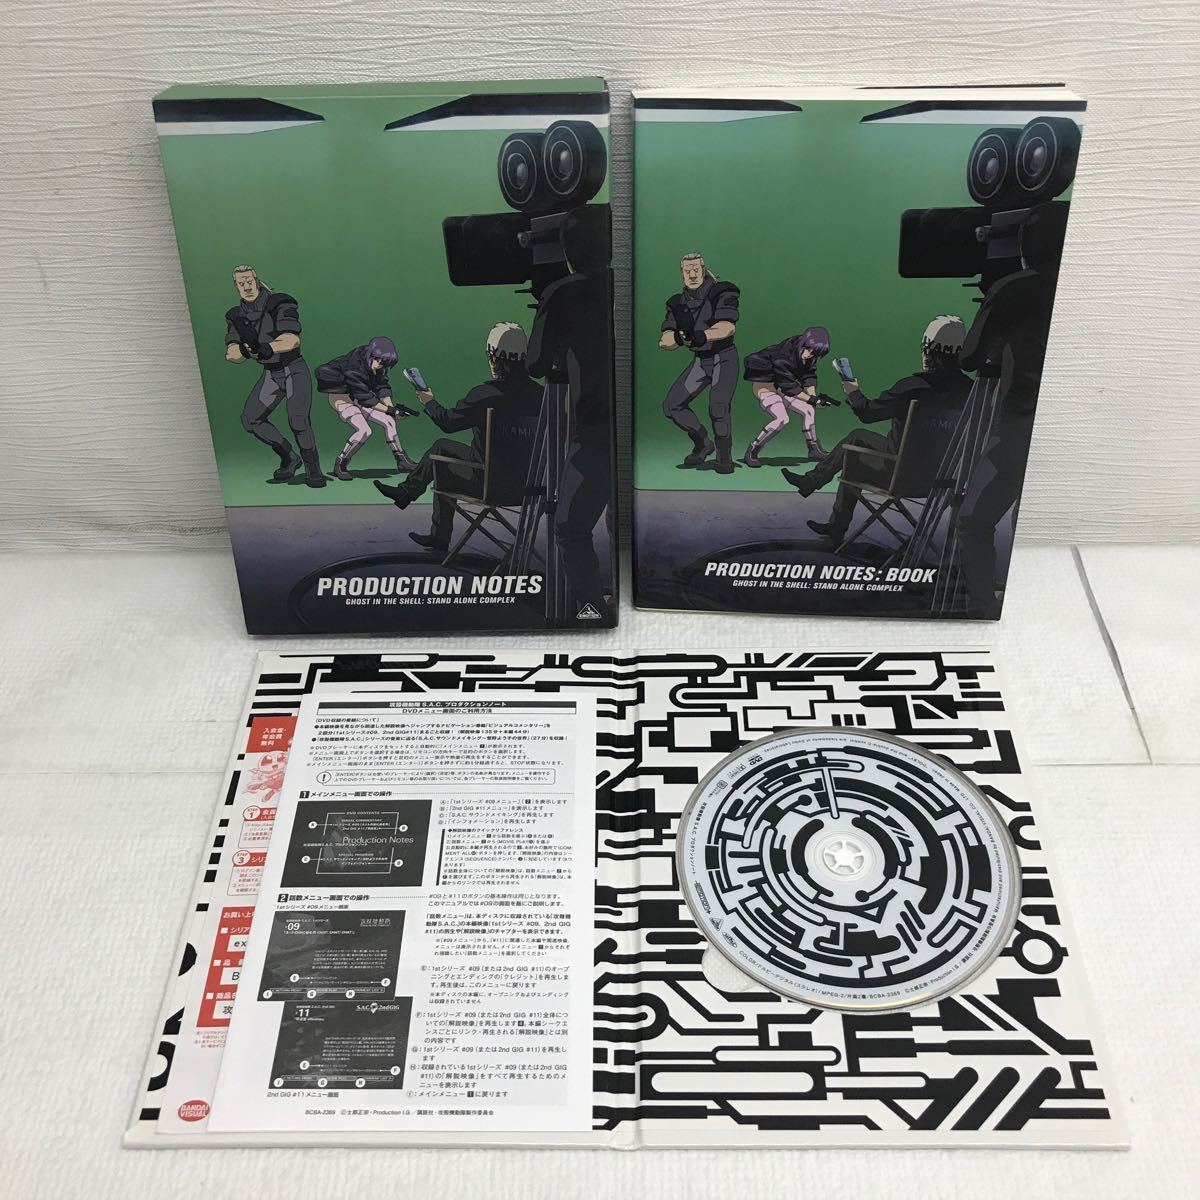 PY1113T 攻殻機動隊 STAND ALONE COMPLEX Official Log 1 2/プロダクションノート/DVD 3本セット 邦画 アニメ 士郎正宗 講談社 バンダイ _画像6